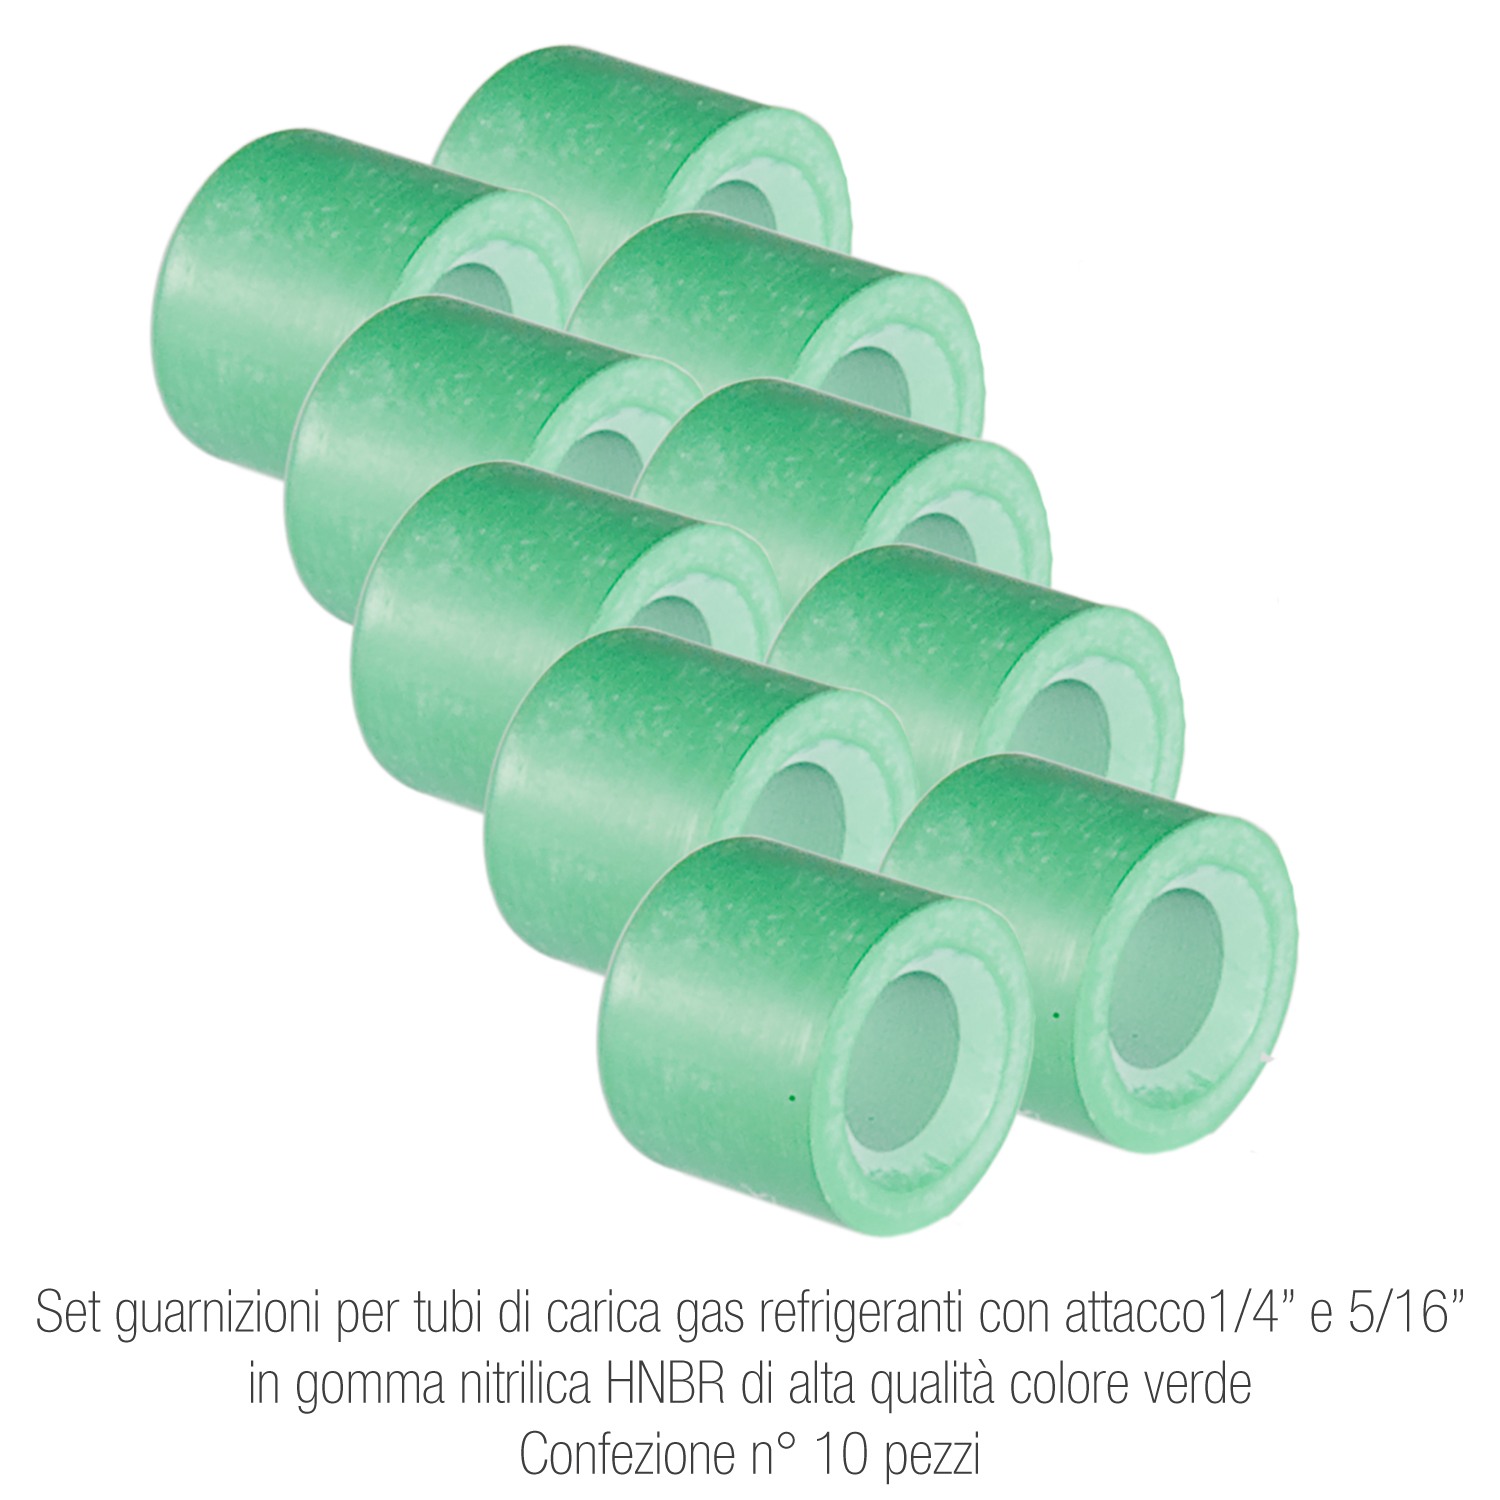 Seal for refrigerant gas charging hoses - connection 1/4 and 5/16, in green HNBR nitrile rubber - package n° 10 pieces